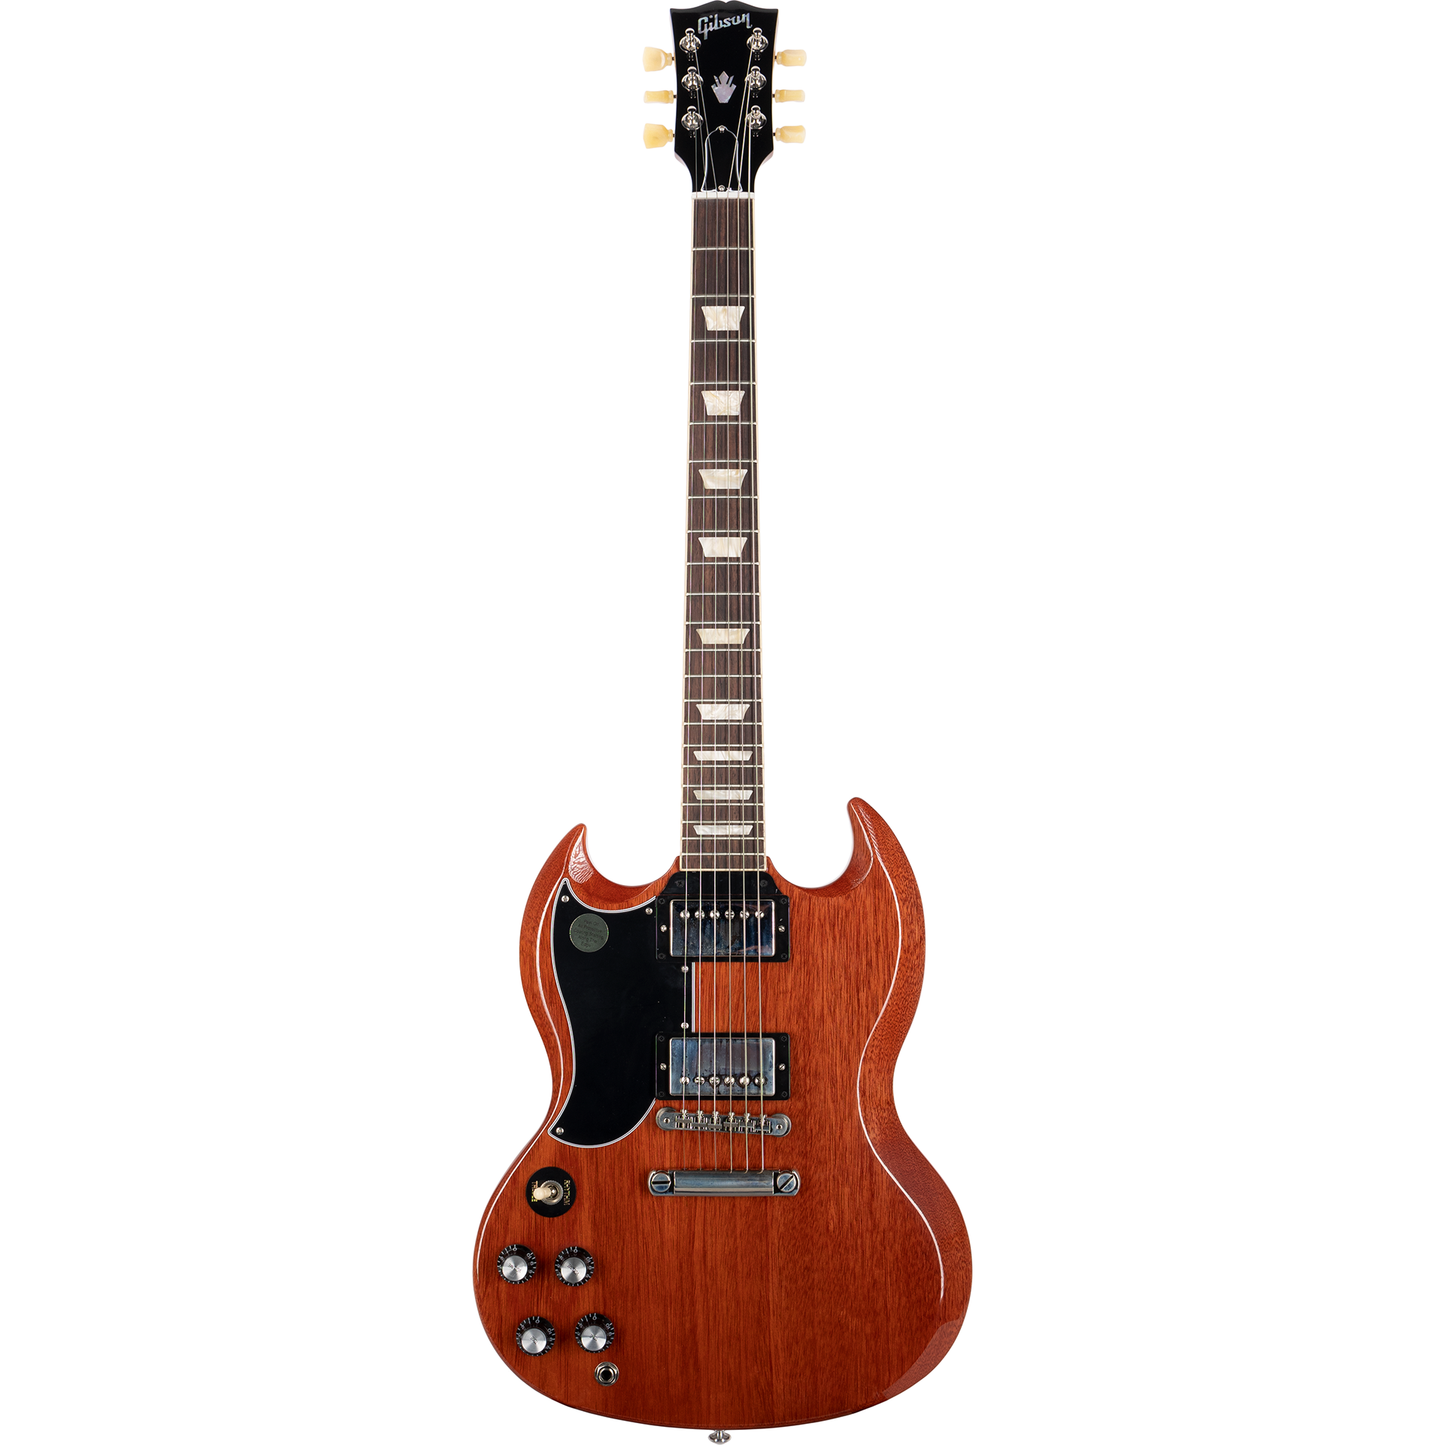 Gibson SG Standard '61 Left Handed Electric Guitar in Vintage Cherry